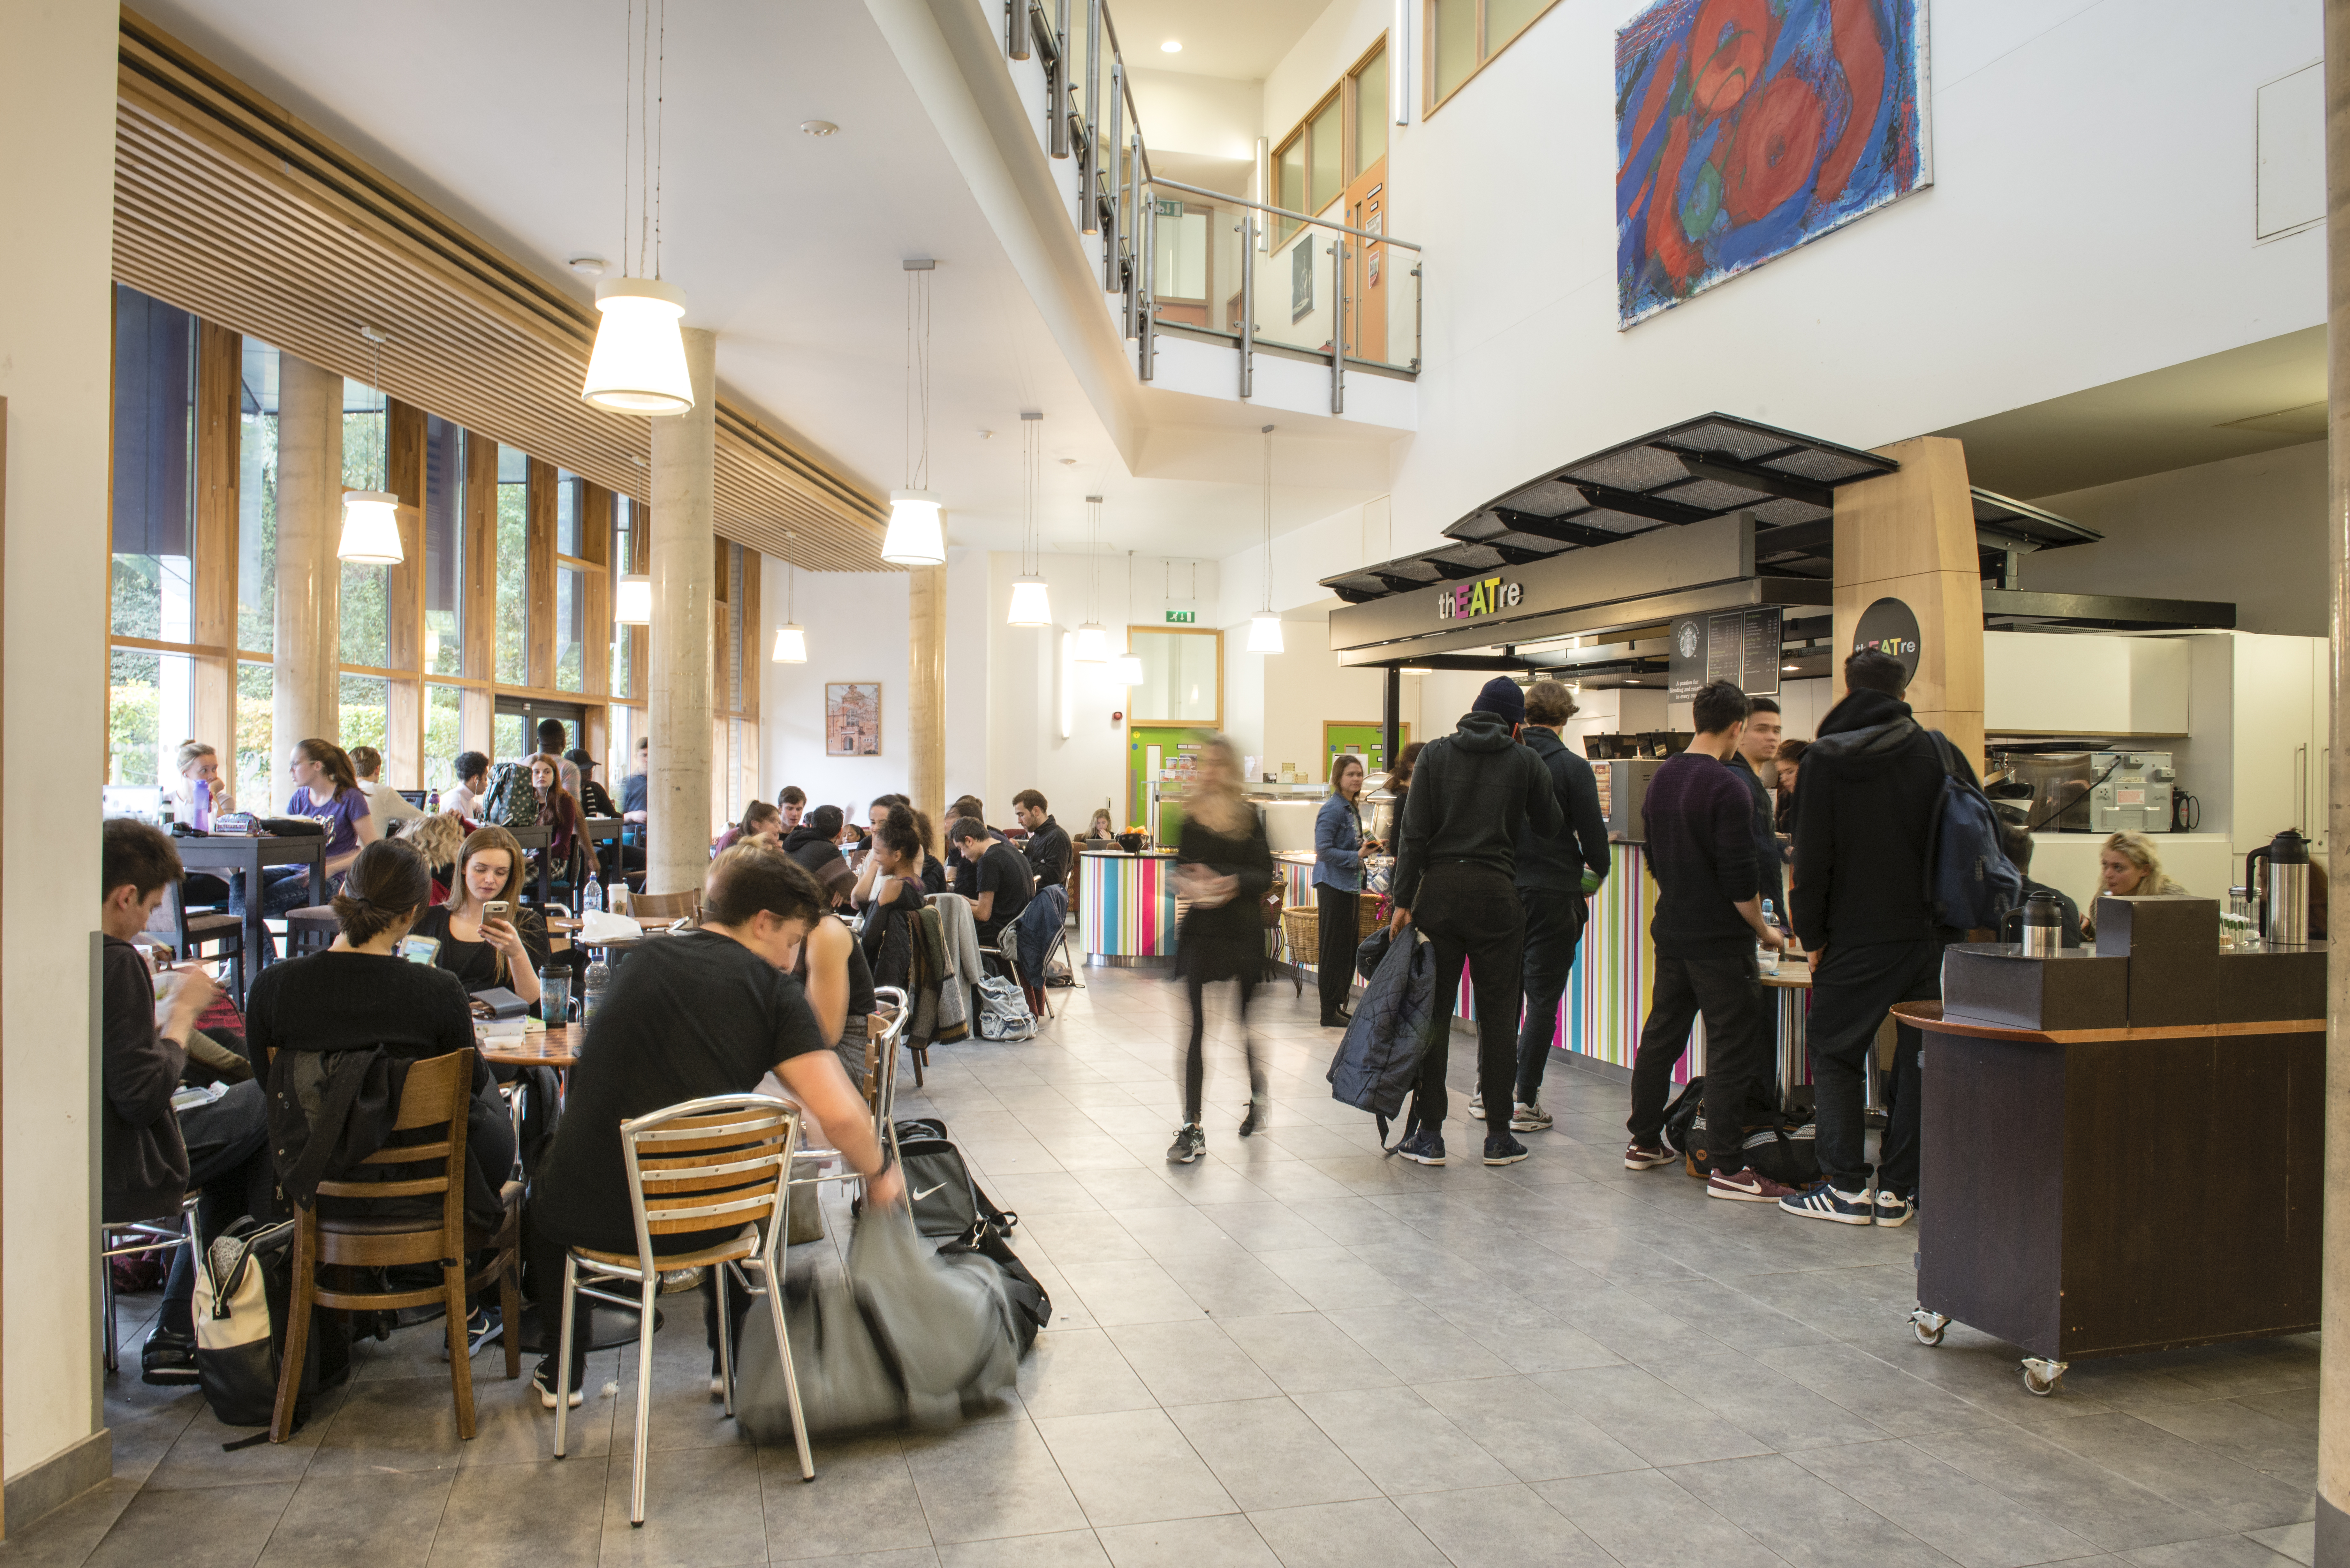 Cafe area with students 